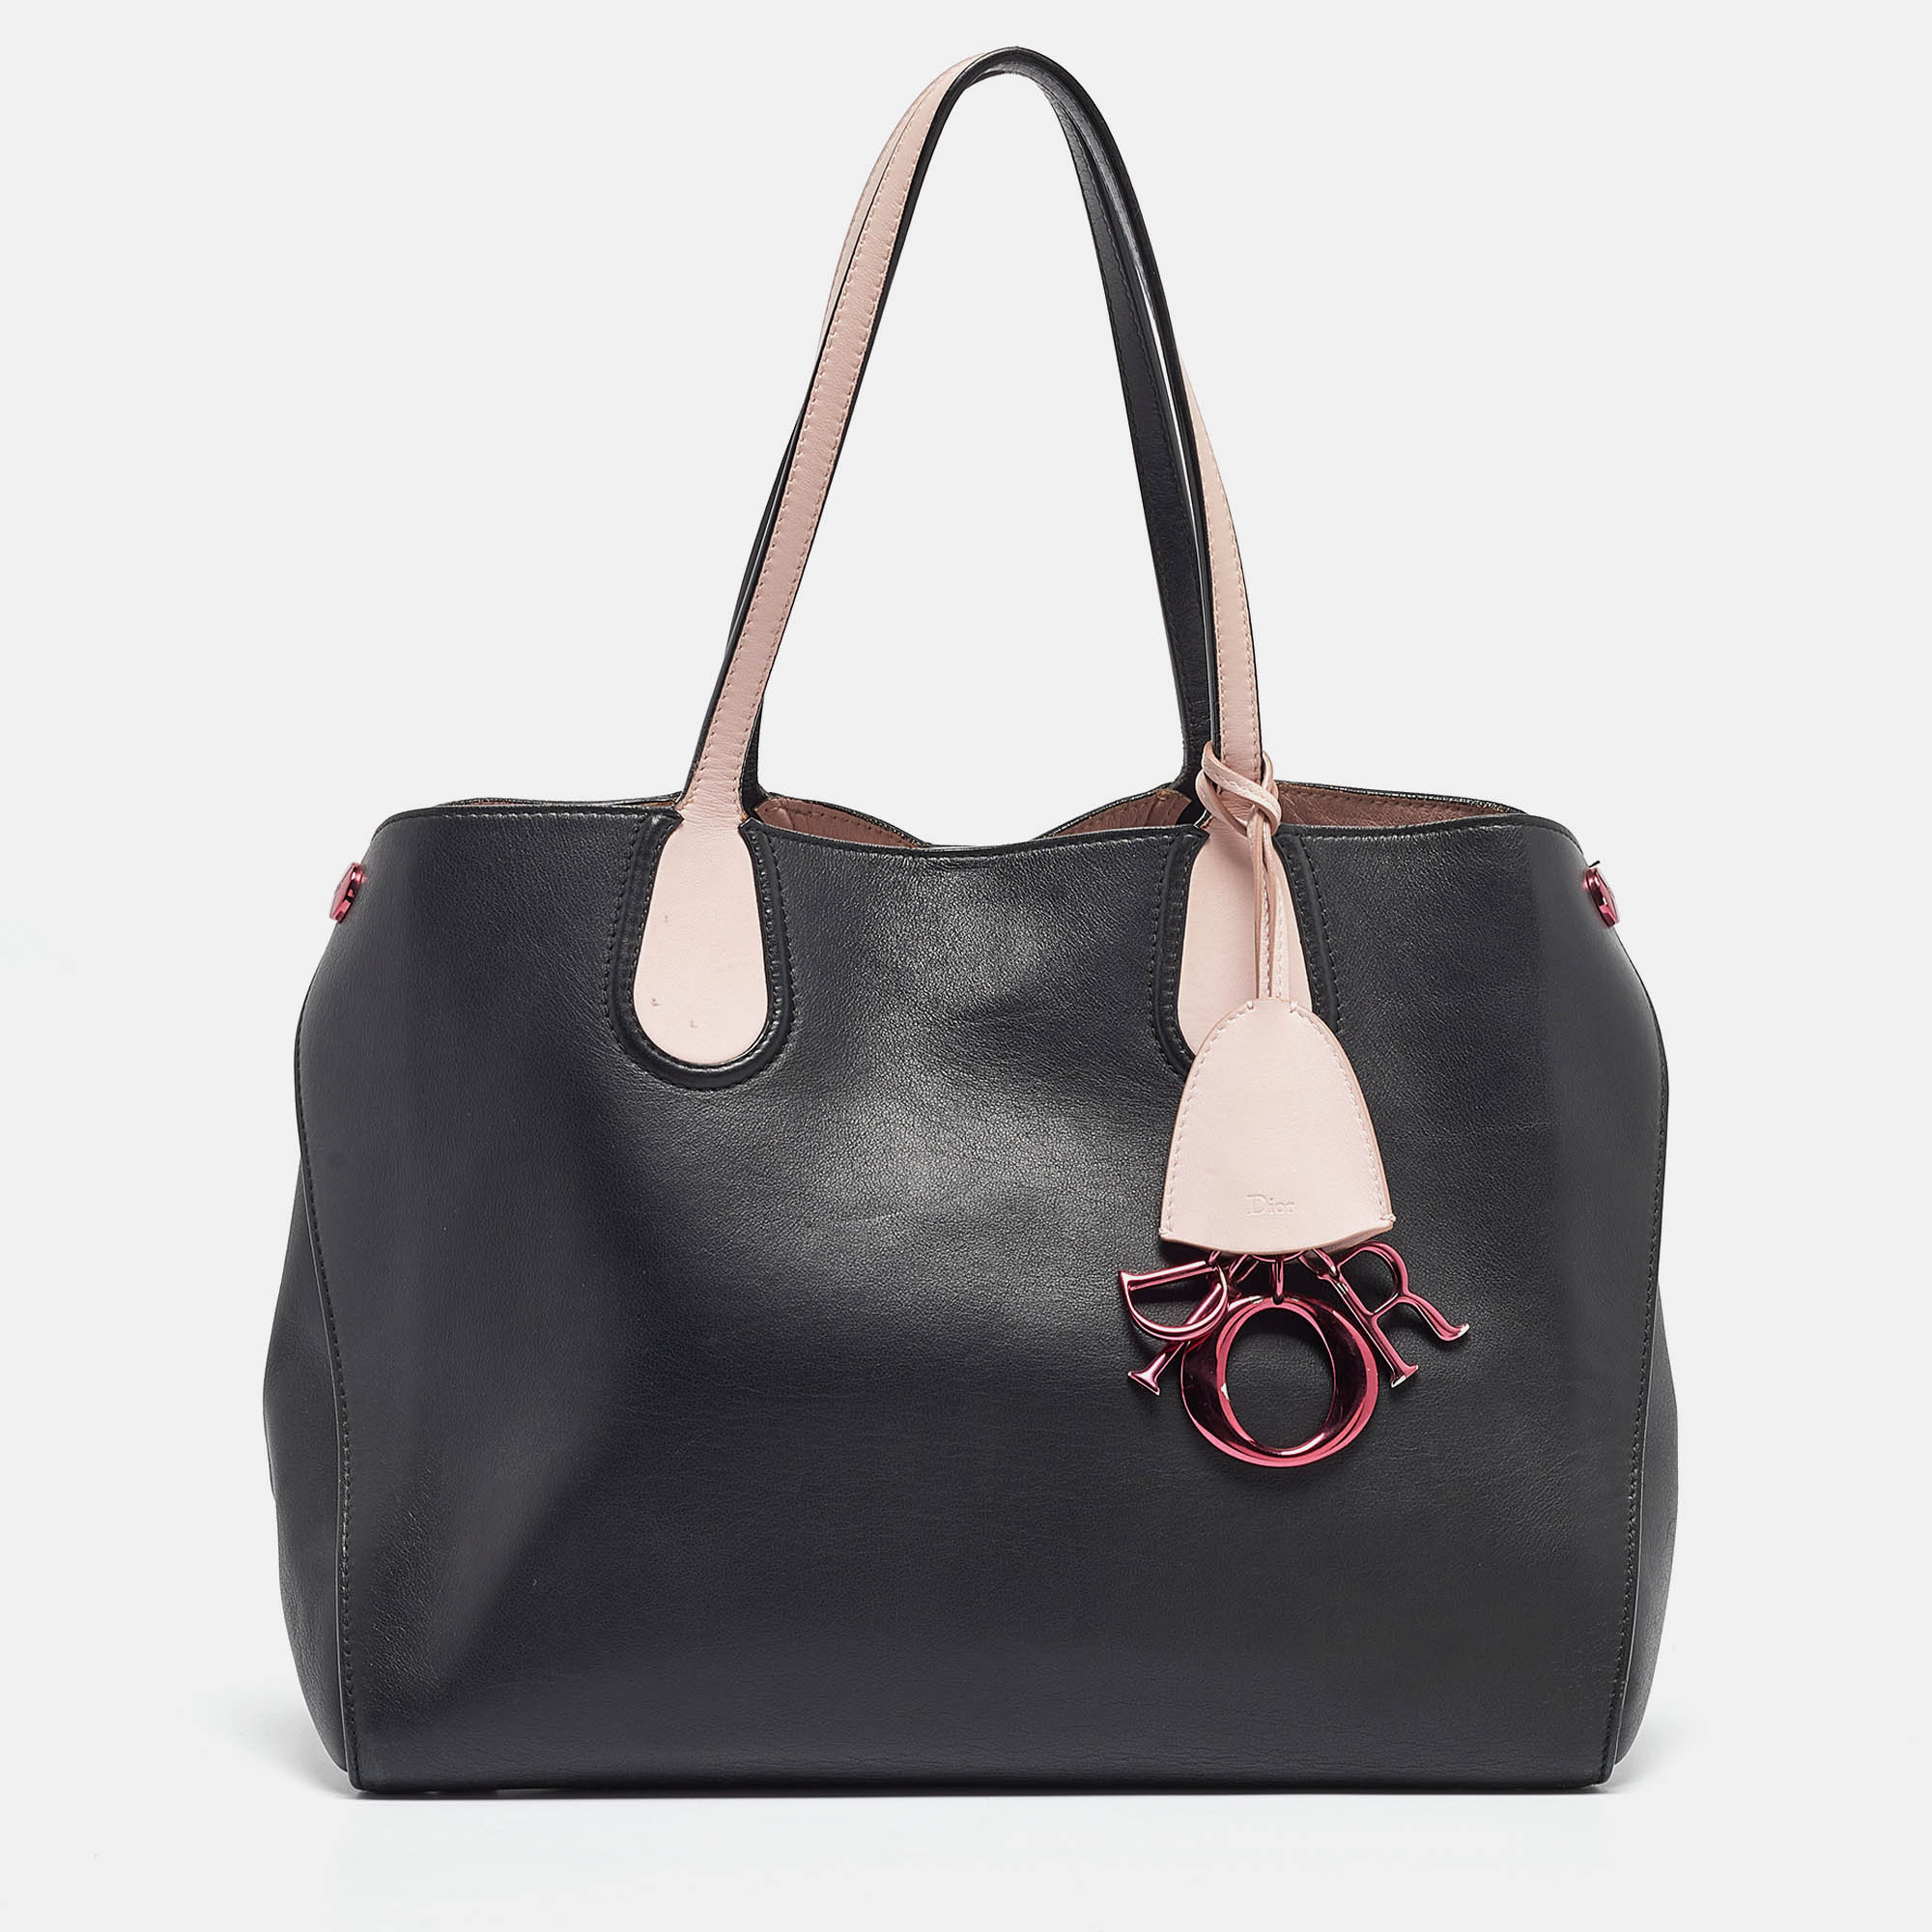 Dior black/pink leather small dior addict shopping tote